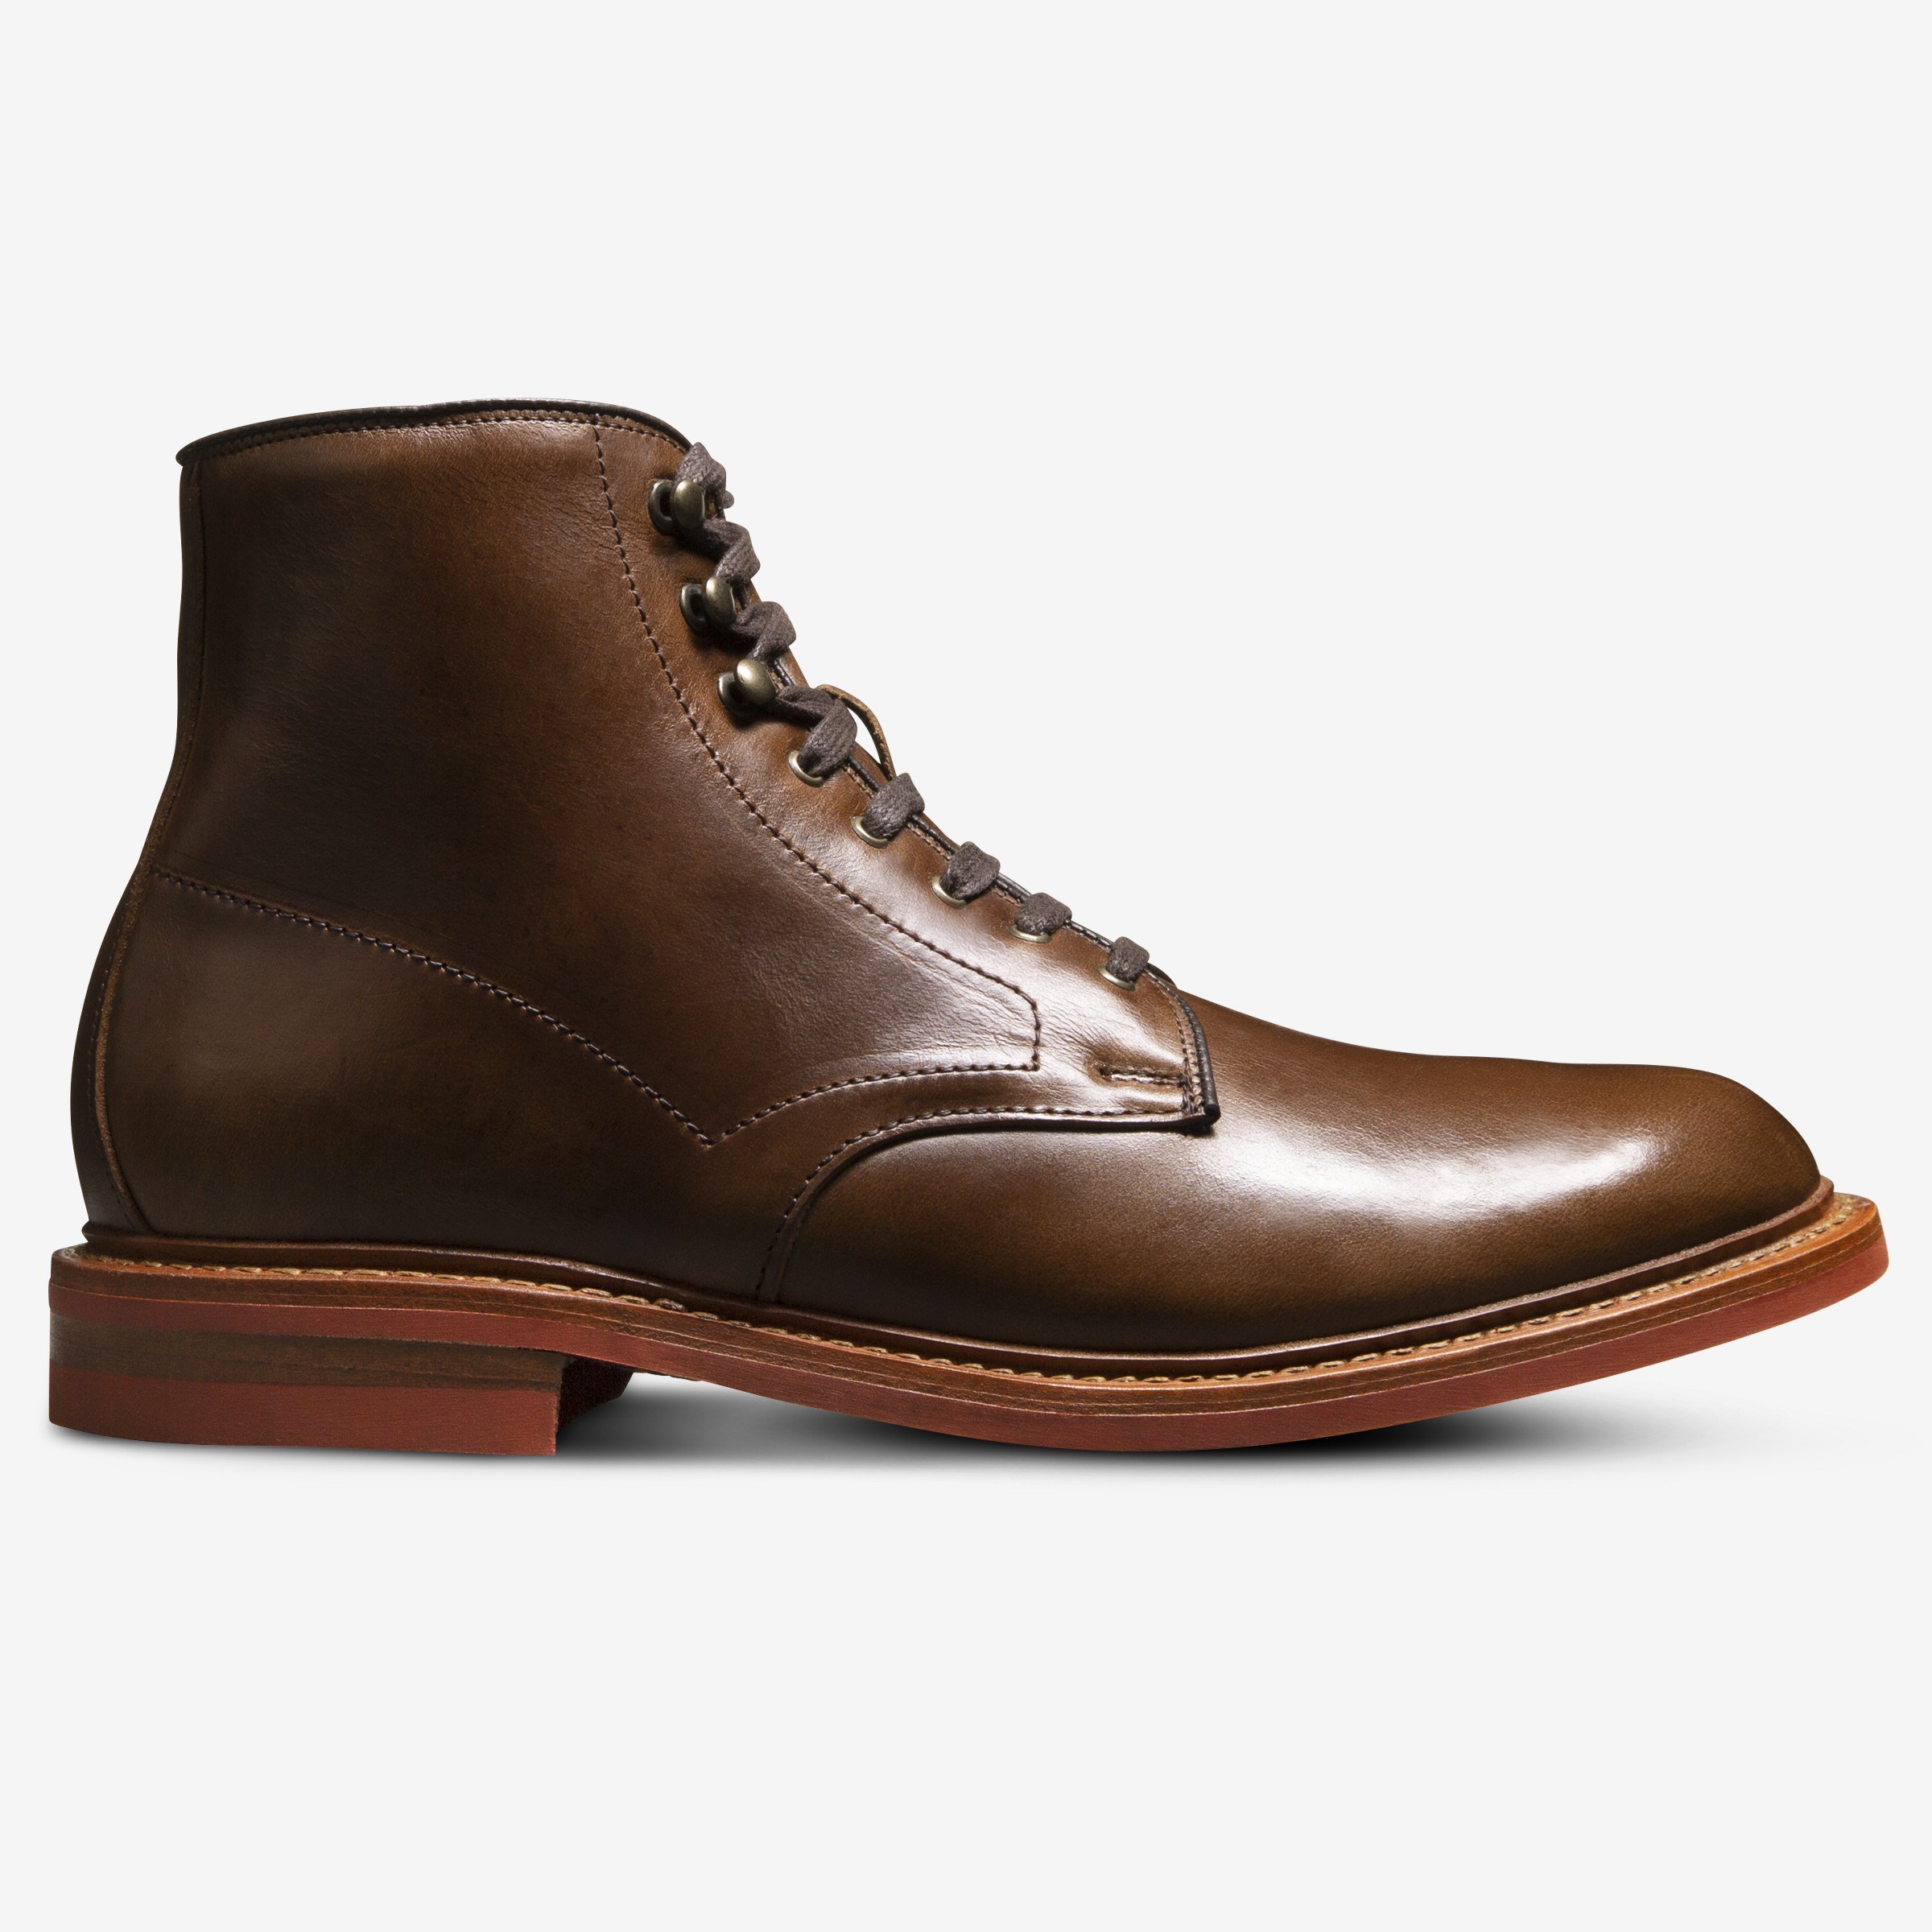 Higgins Mill Weatherproof Boot with Chromexcel Leather | Men's